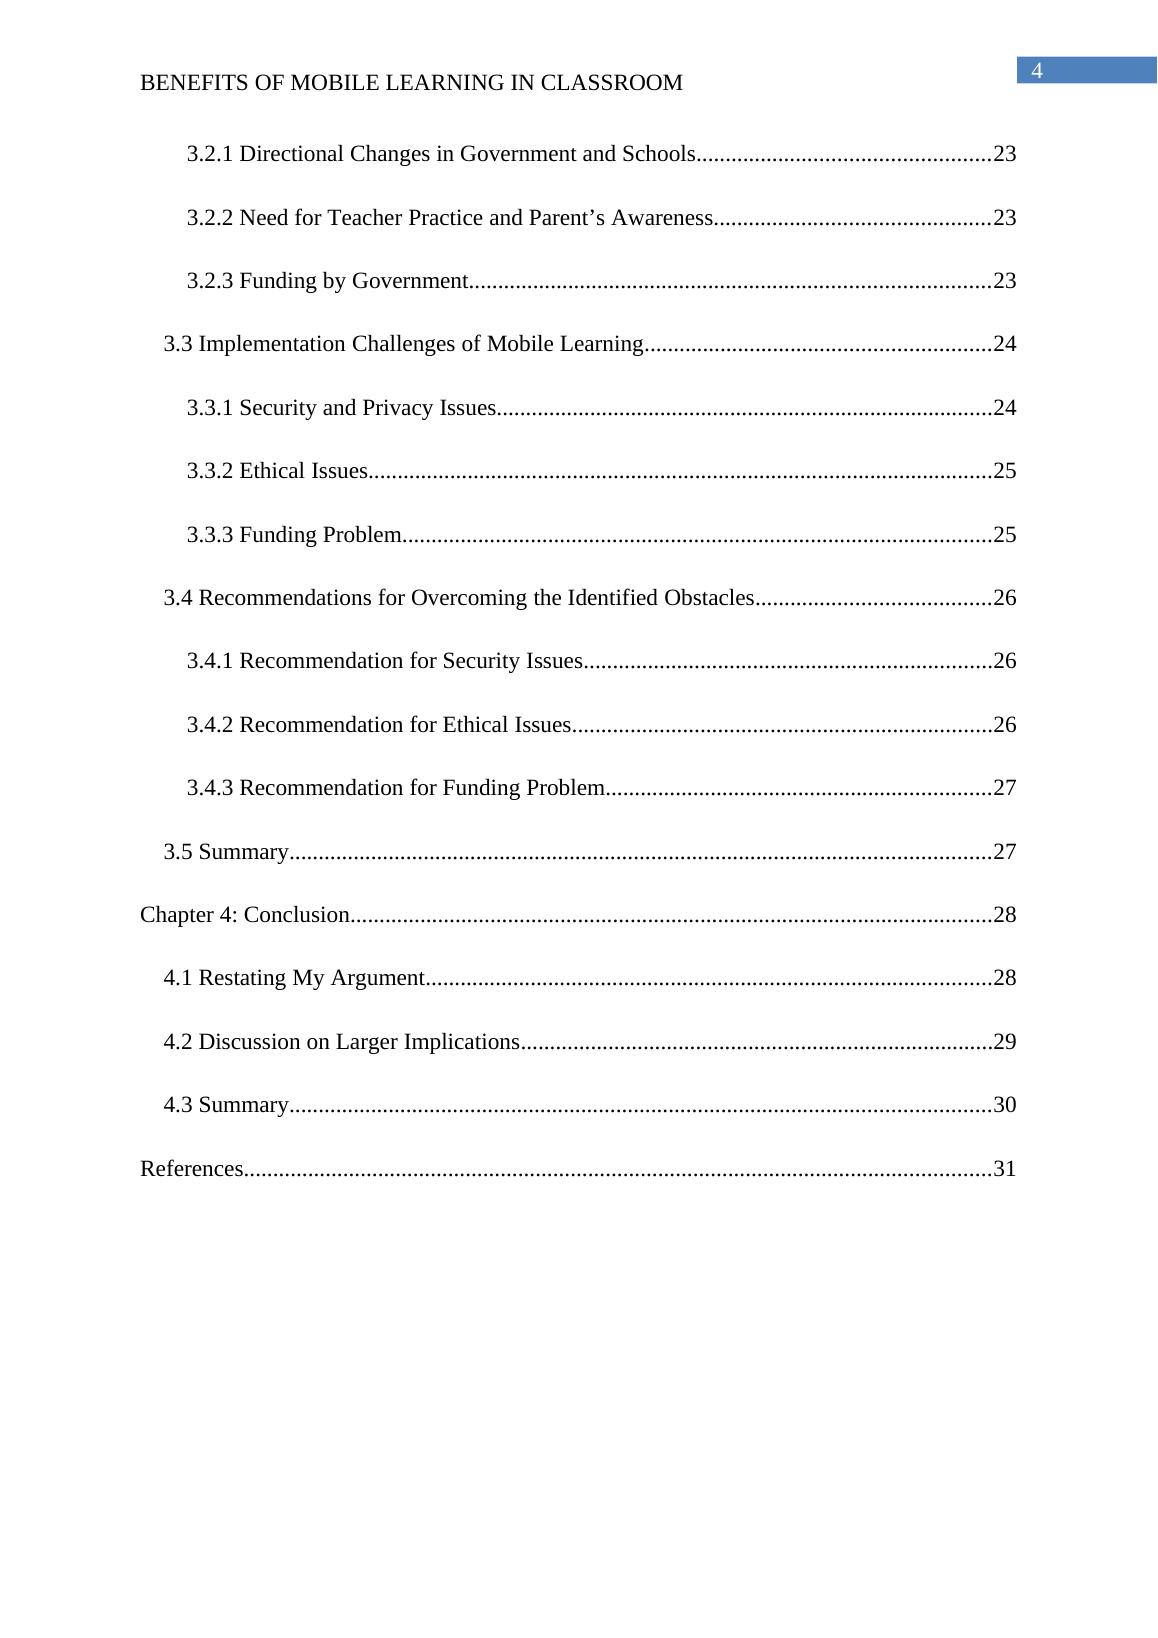 The objective of this thesis paper is to set in the content of mobile learning benefits_4